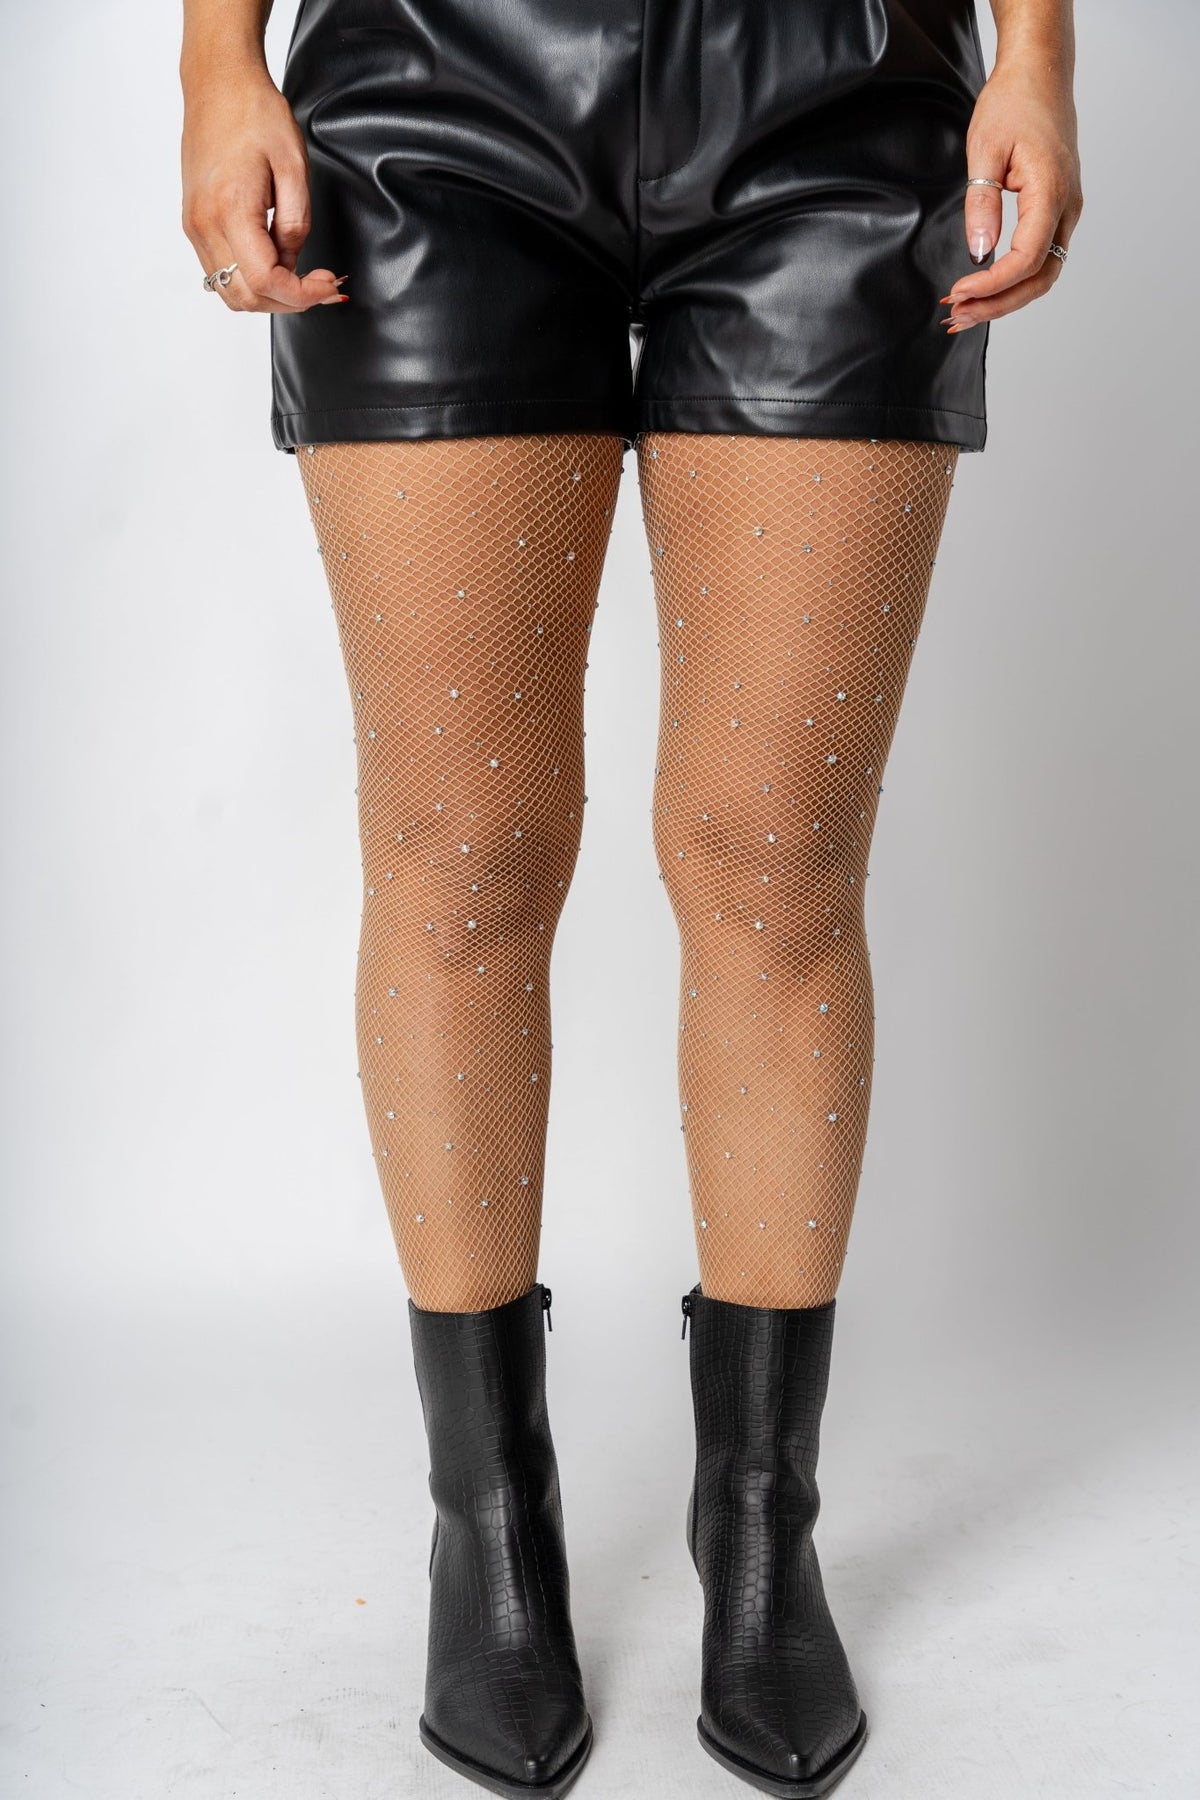 Rhinestone fishnet pantyhose nude - Trendy New Year's Eve Outfits at Lush Fashion Lounge Boutique in Oklahoma City